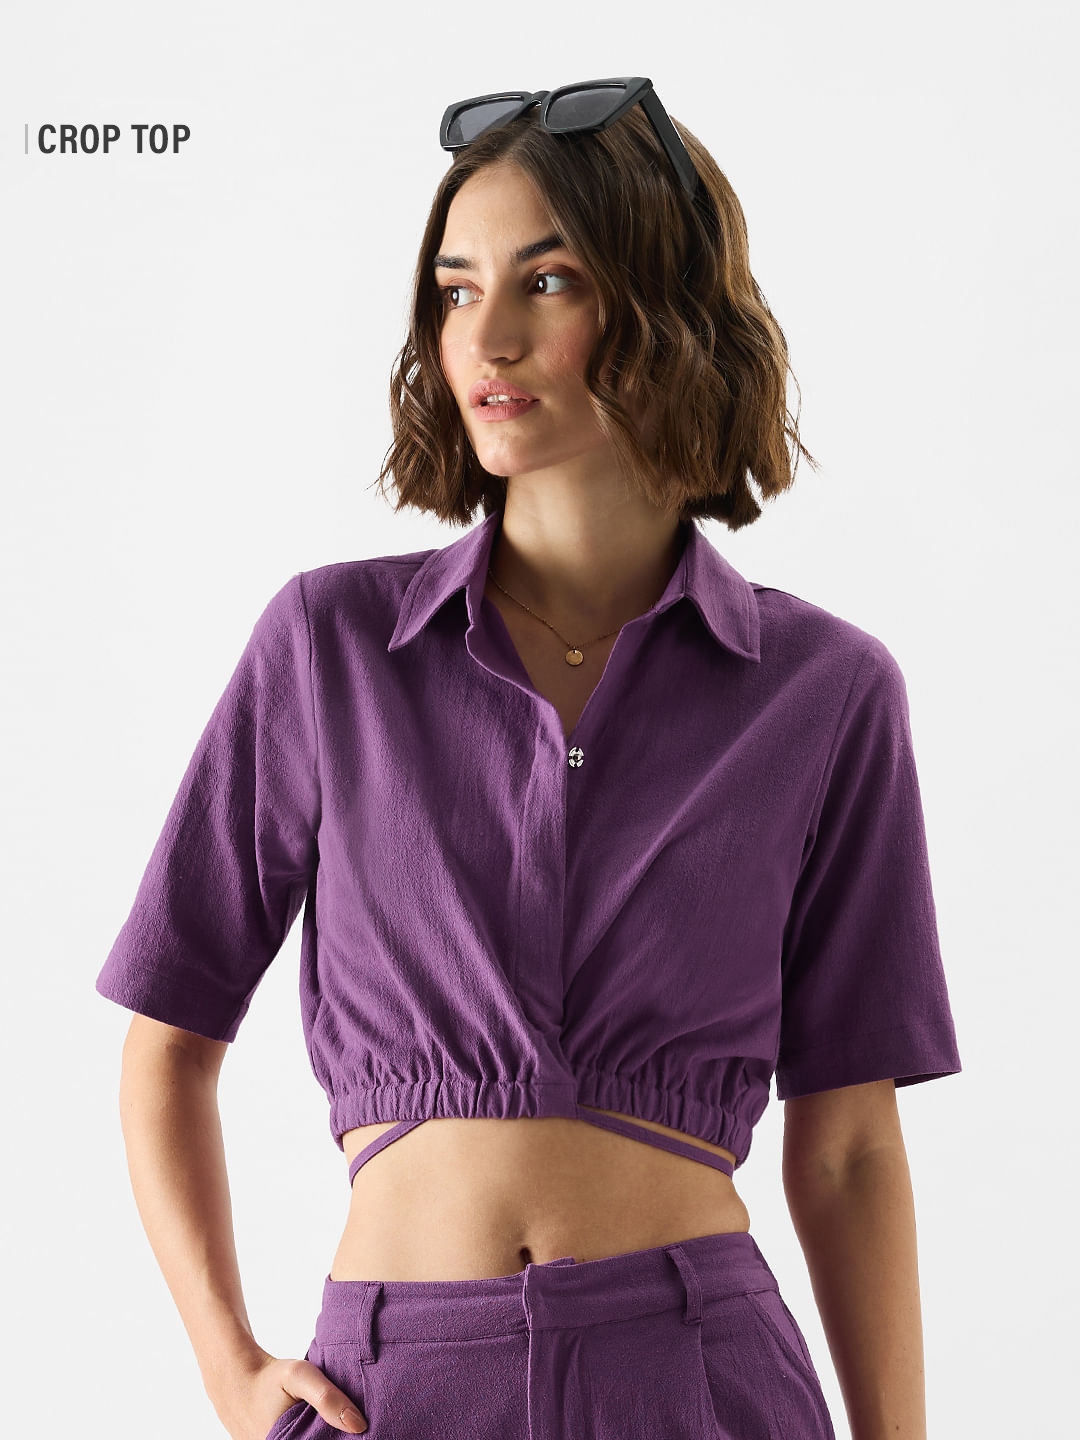 Women's Solids: Plum Cropped Shirts